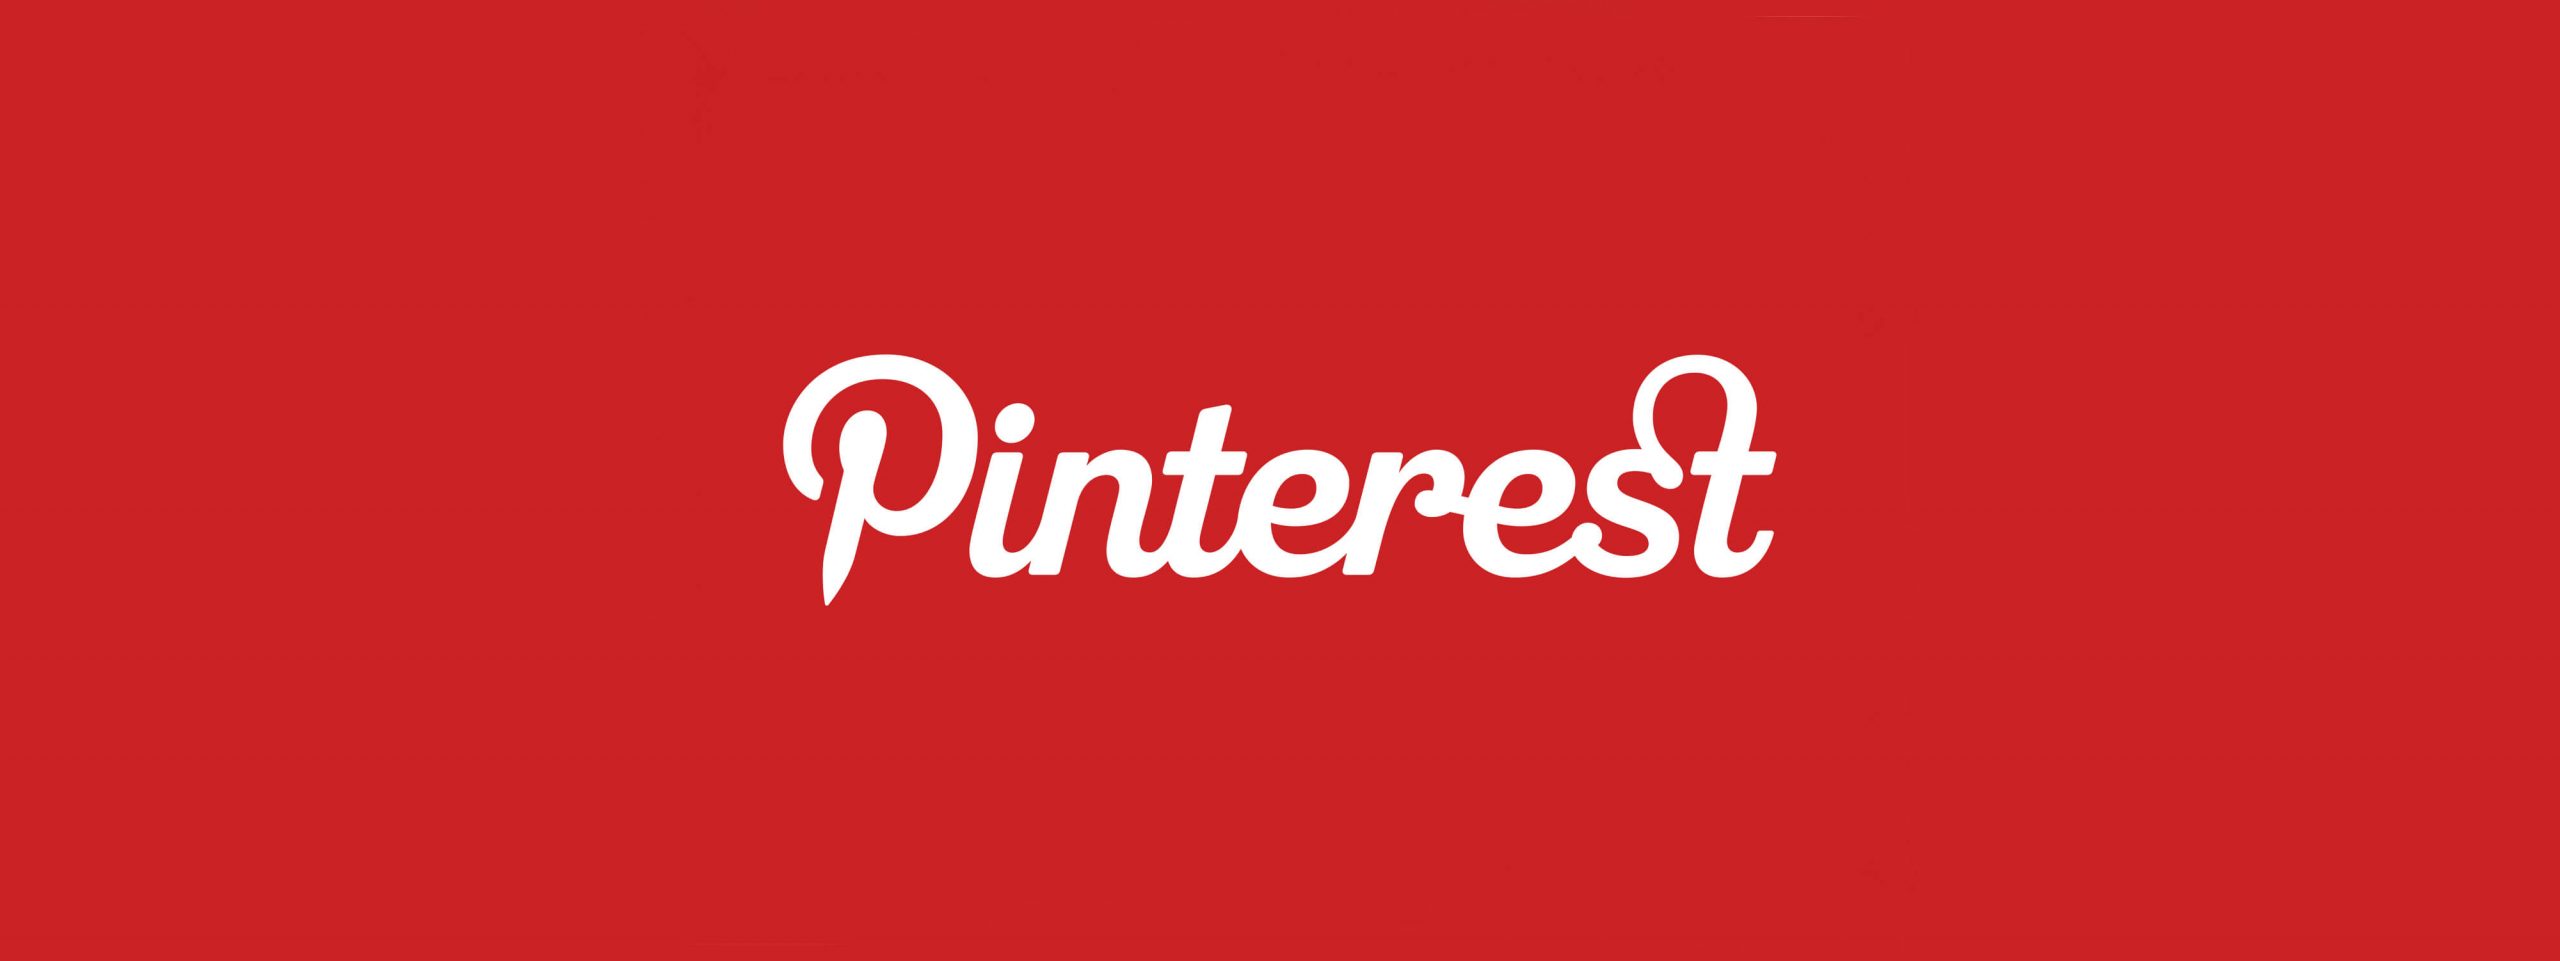 5 Pinterest Marketing Tips You Can’t Ignore